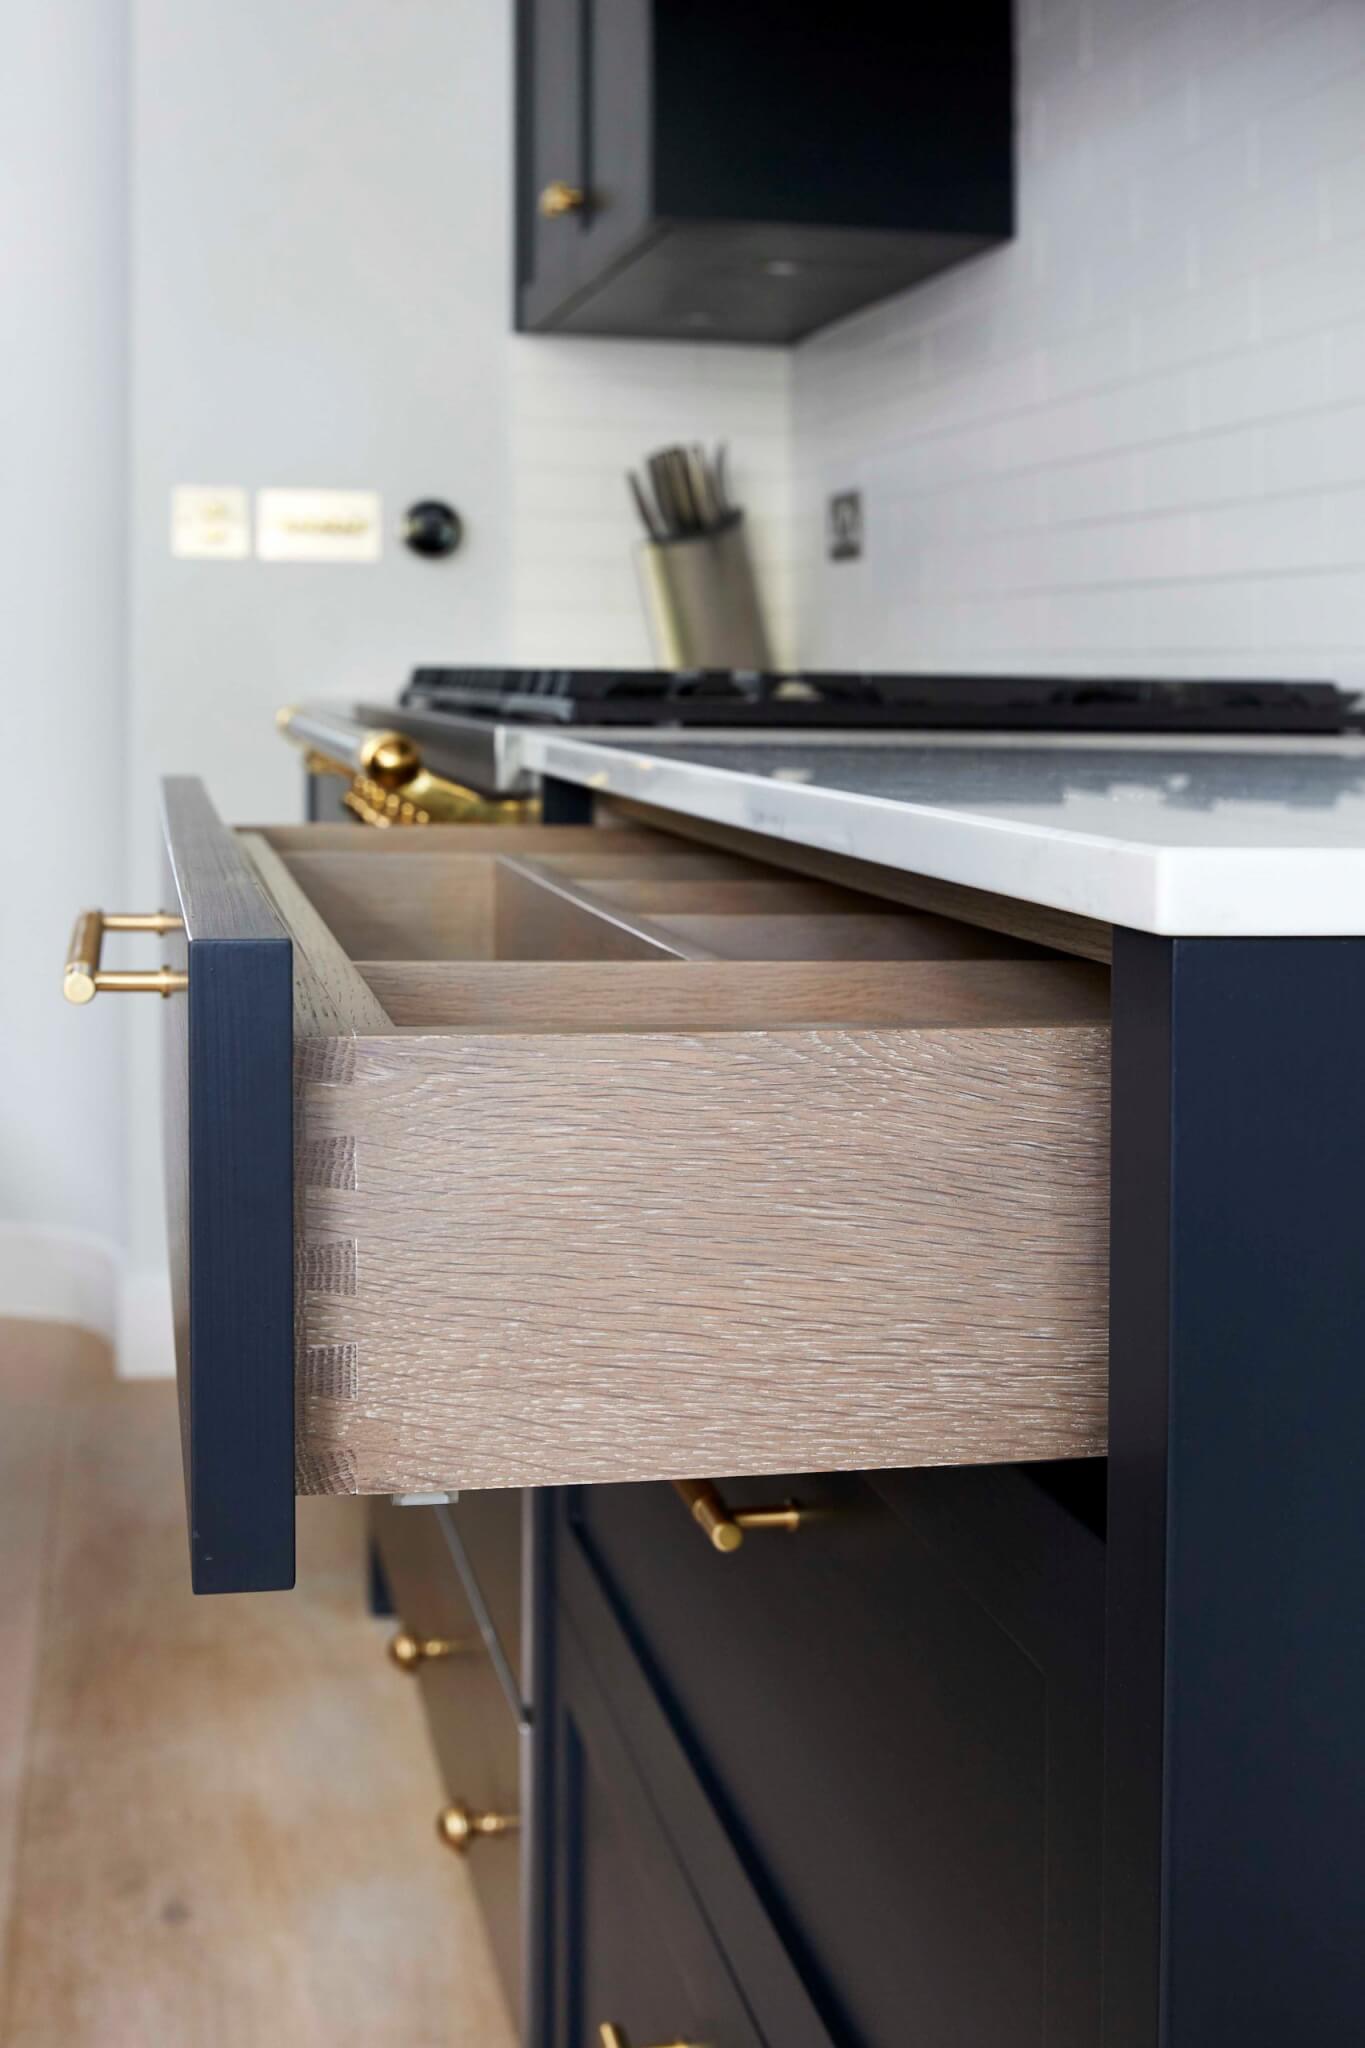 Maida Vale Tennyson Road extension and renovation kitchen joinery detail